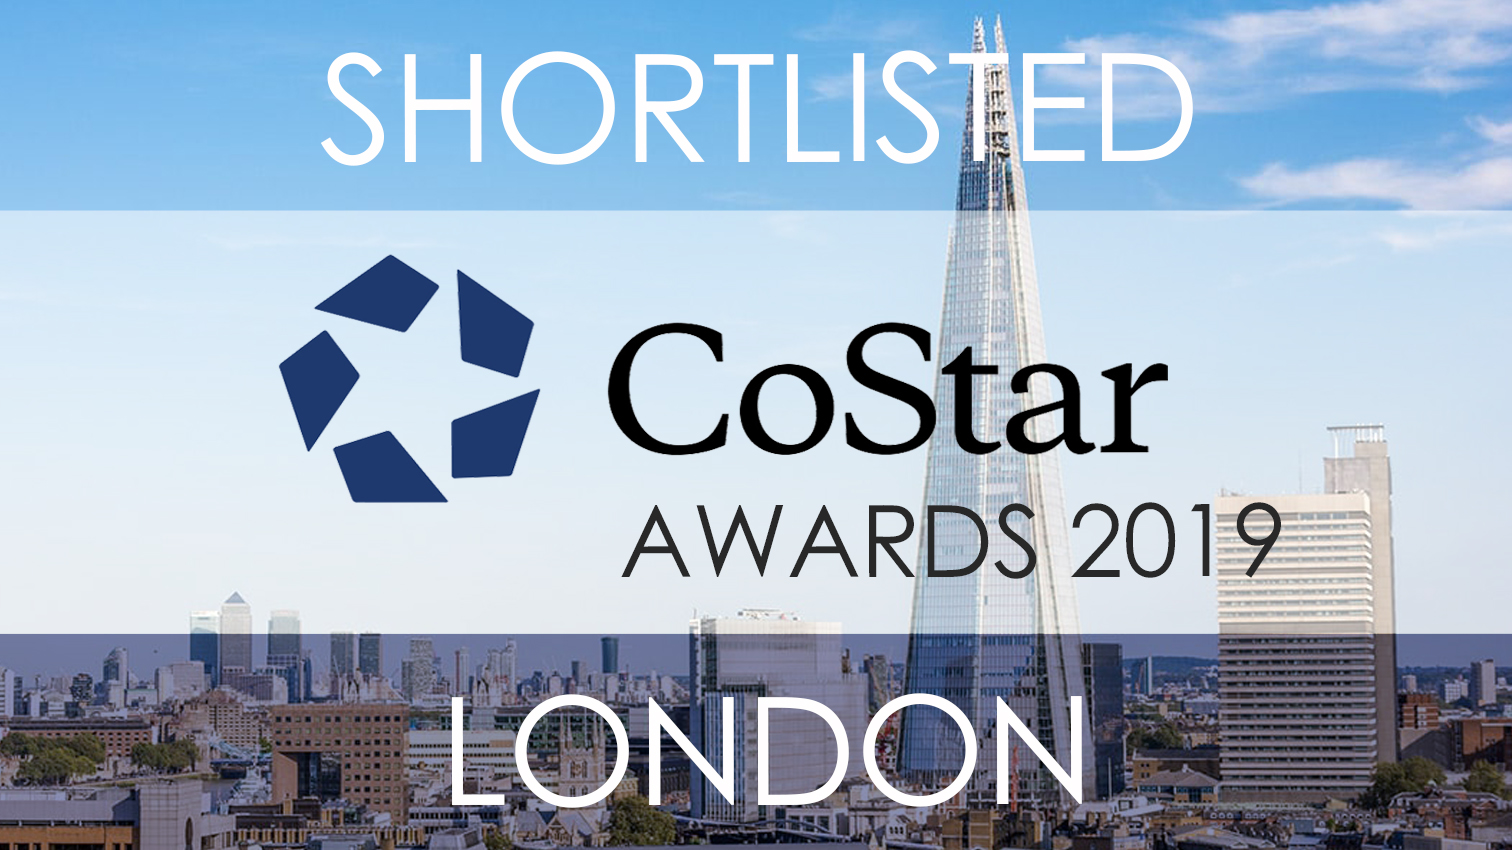 Shortlisted for 2 CoStar Awards